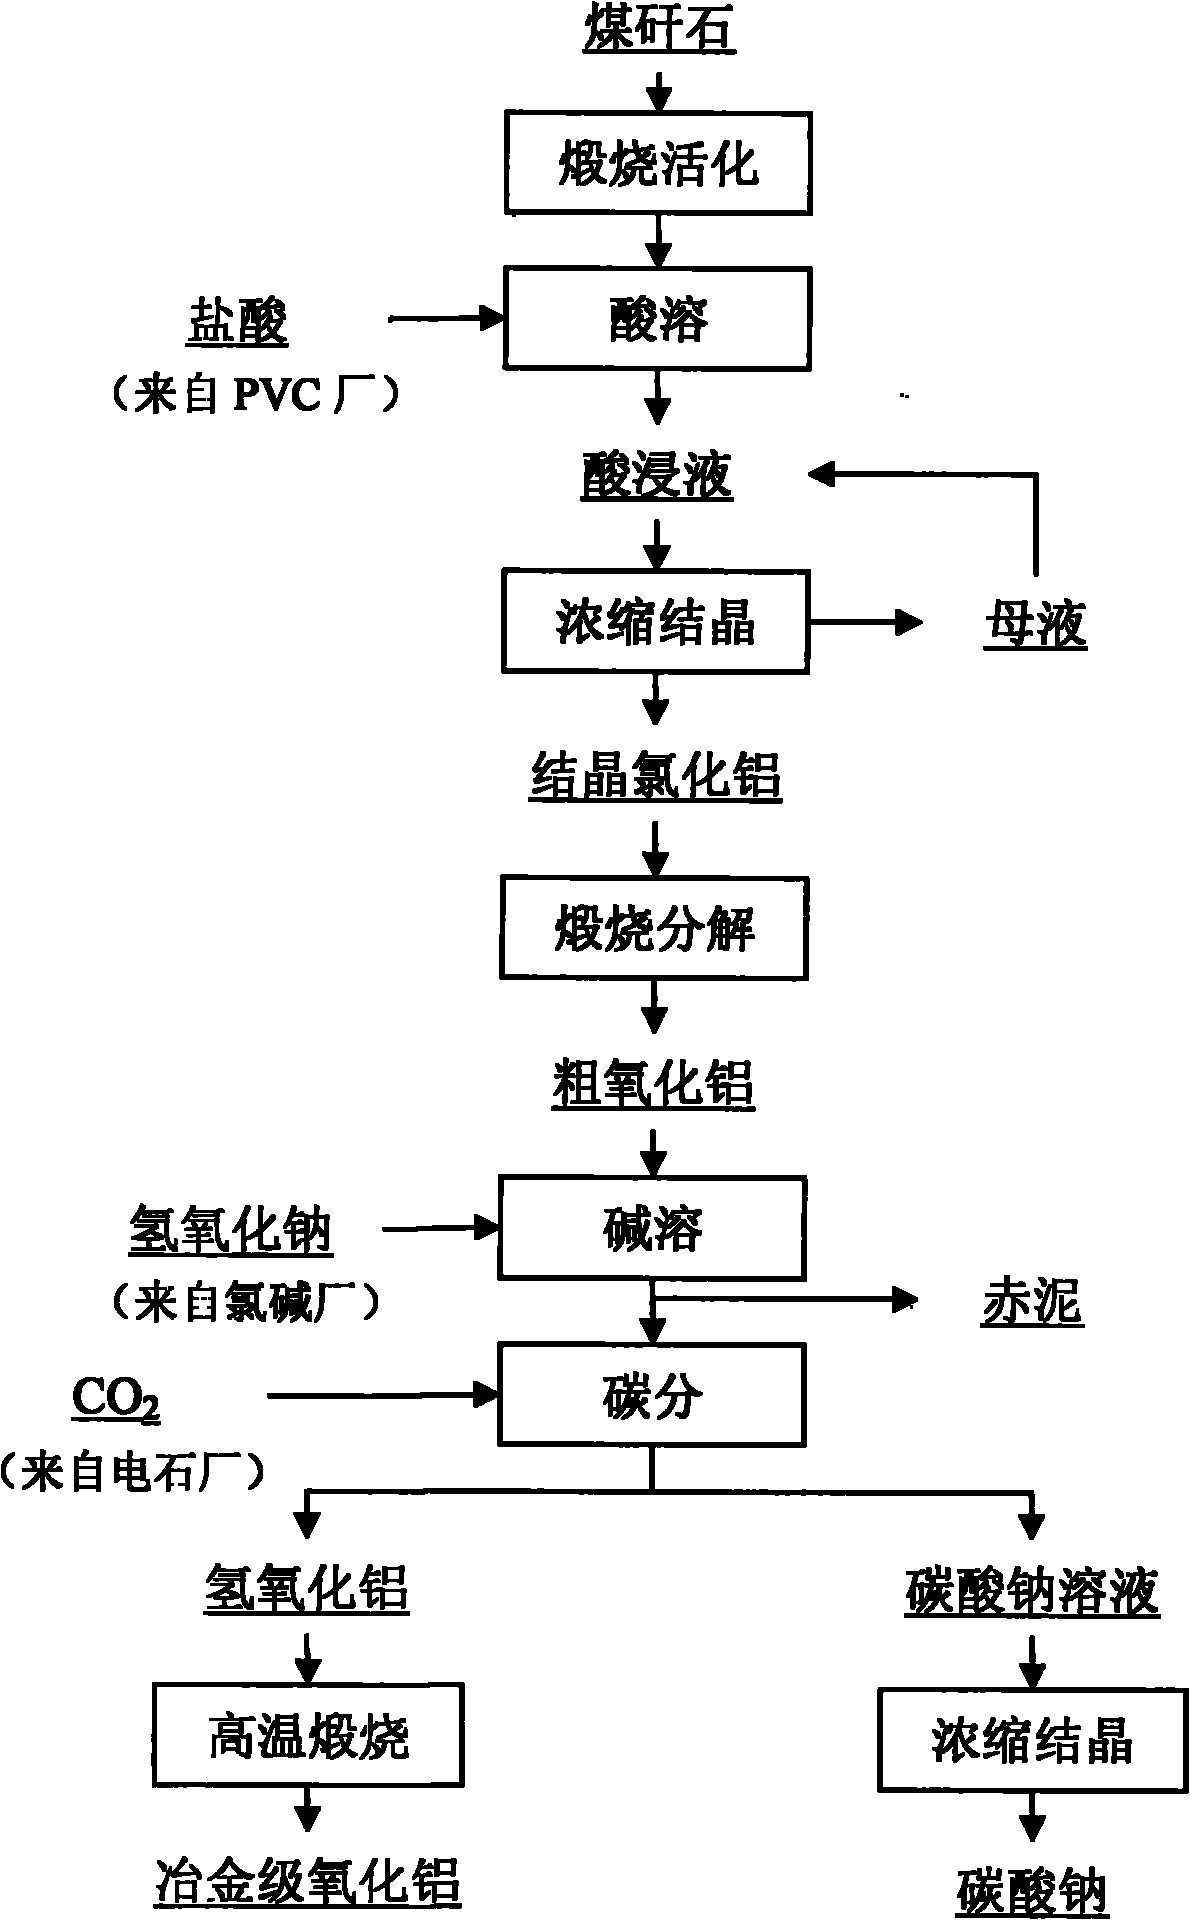 Method for co-producing aluminum oxide and sodium carbonate from coal gangue